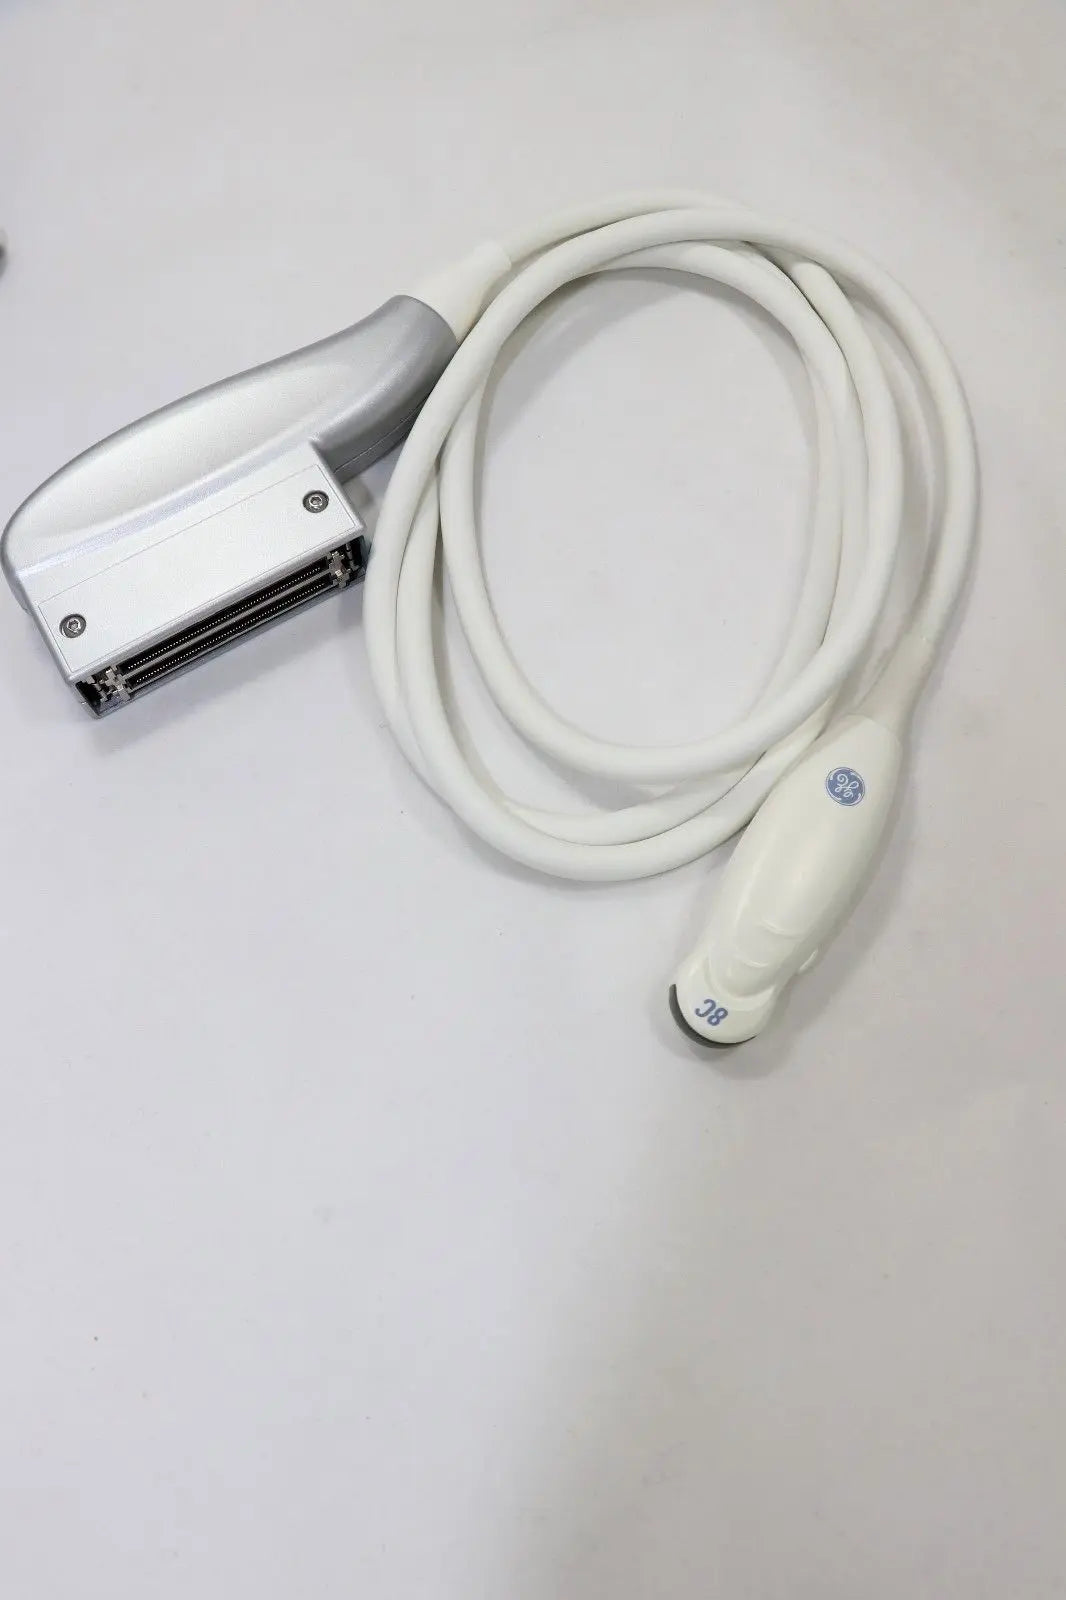 *New Open Box* GE 8C-RS Ultrasound Transducer DIAGNOSTIC ULTRASOUND MACHINES FOR SALE